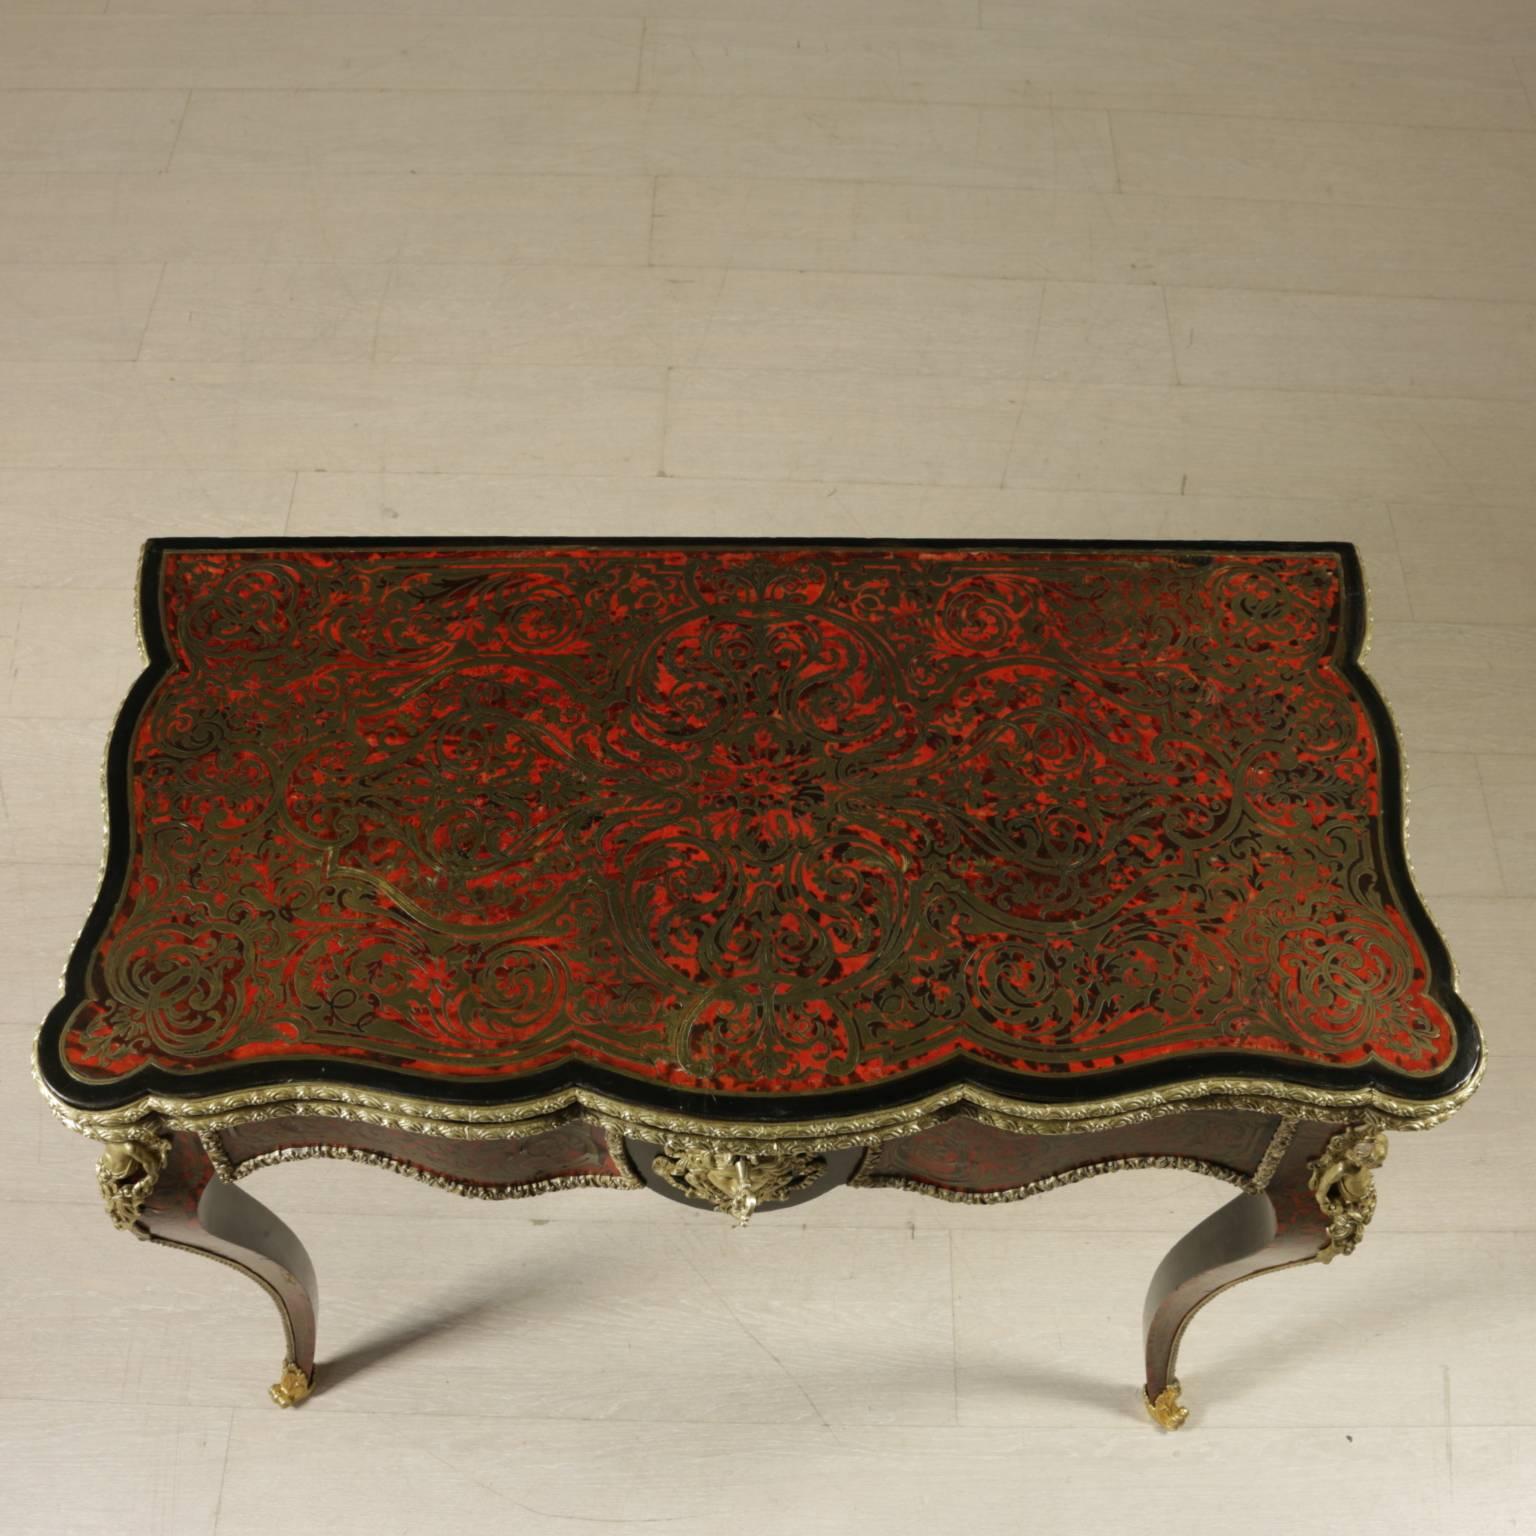 A Boulle style richly inlaid game table with four curved legs, curved band, openable top. Ebony and red turtle inlaid surface, with engraved brass inlays. Green velcro inside the top. The table is enriched by glided bronzes surrounding all the